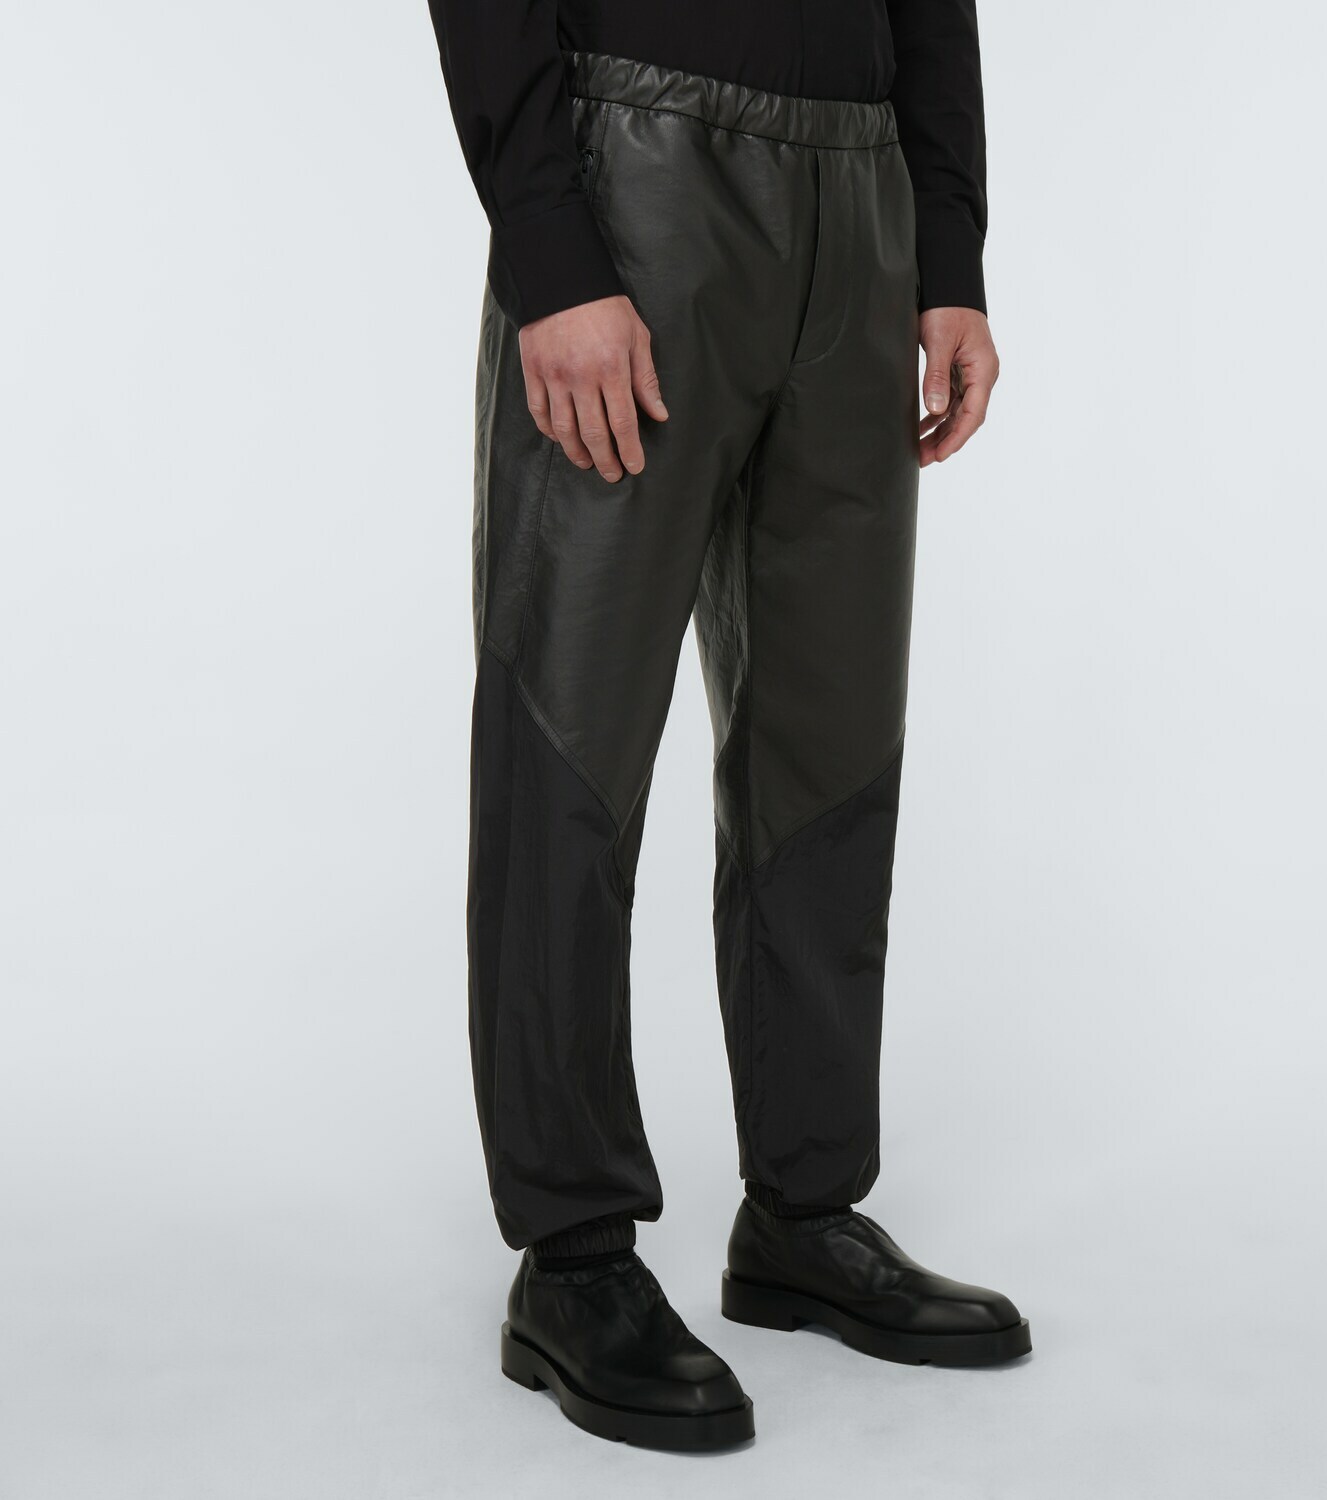 Givenchy - Leather and nylon sweatpants Givenchy